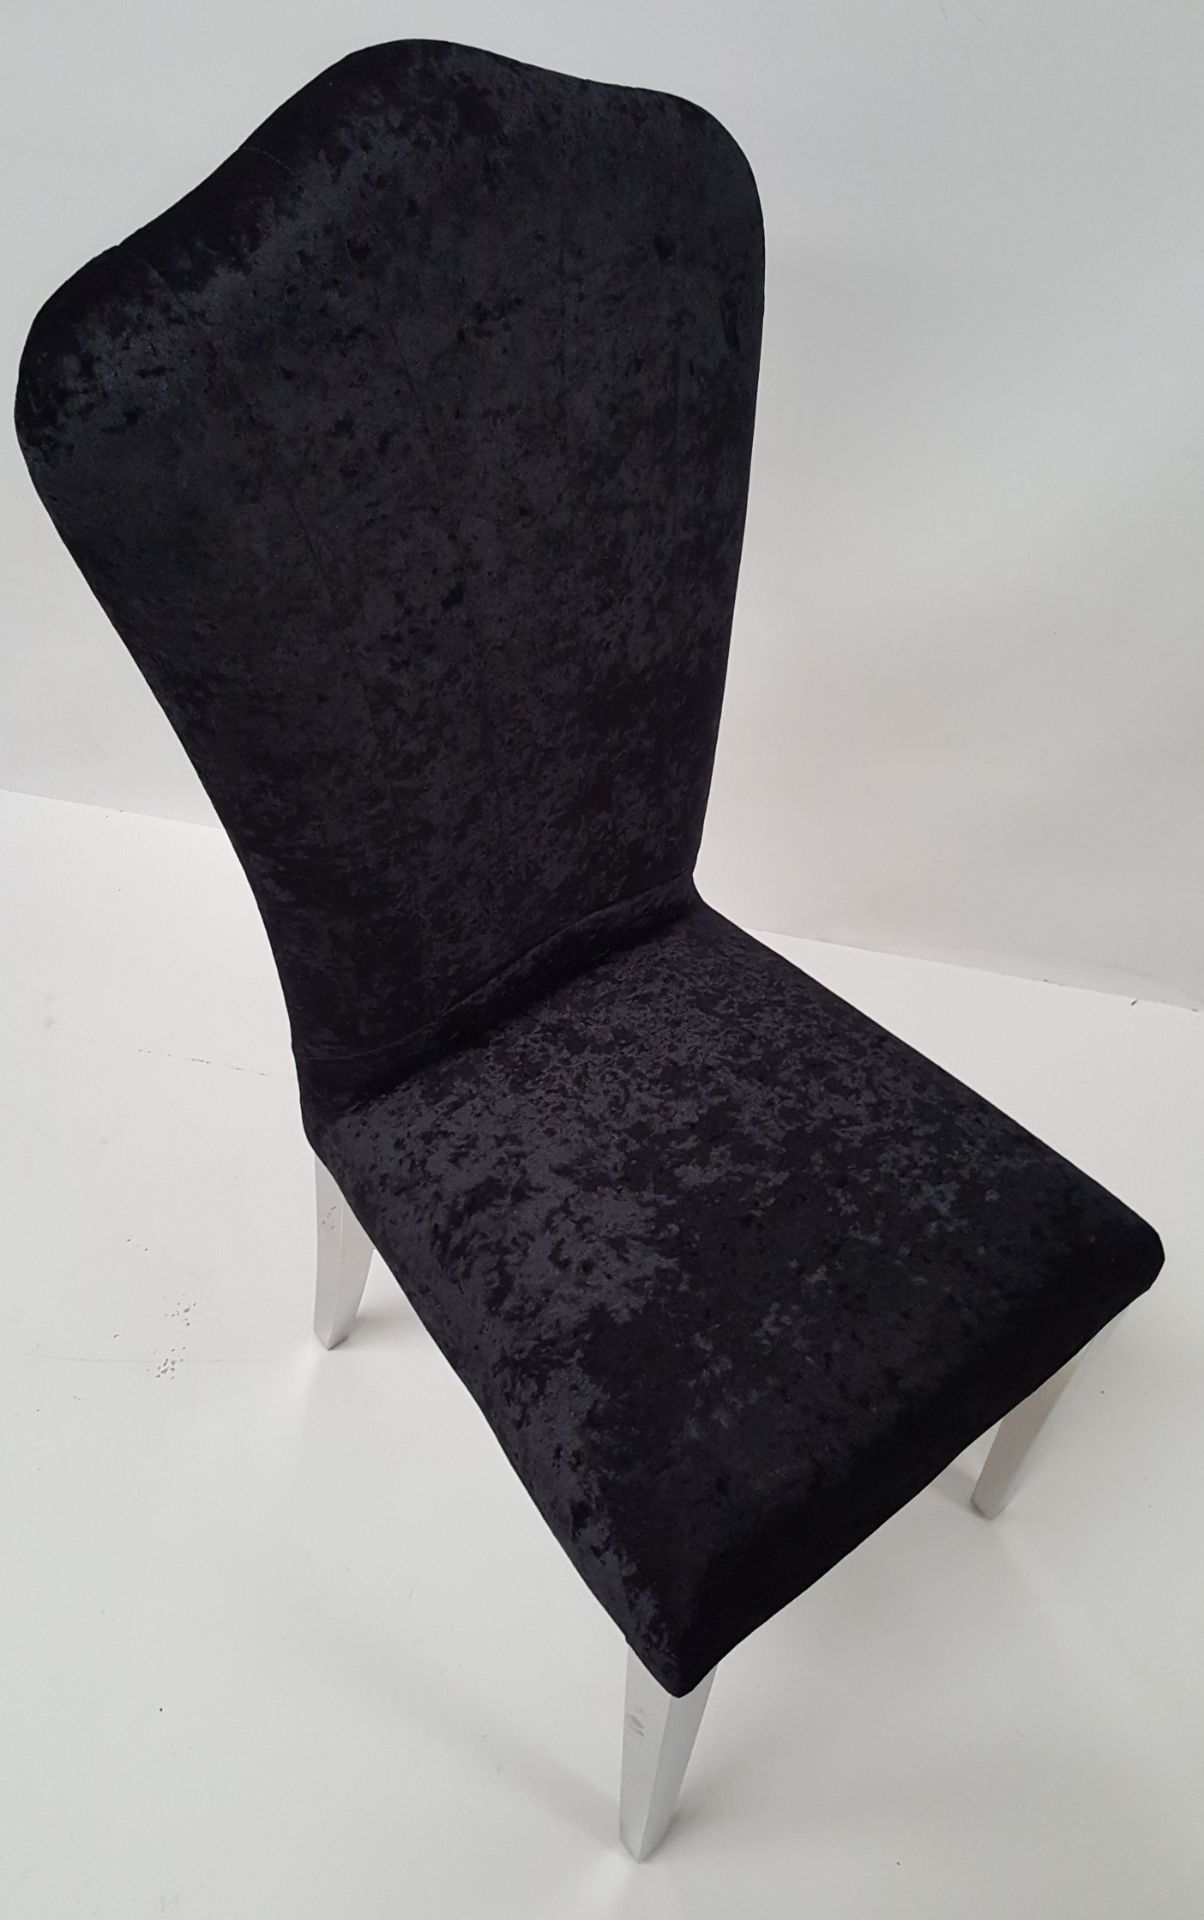 6 x STYLISH BLACK CRUSHED VELVET DINING TABLE CHAIRS - CL408 - Location: Altrincham WA14 - Image 3 of 6